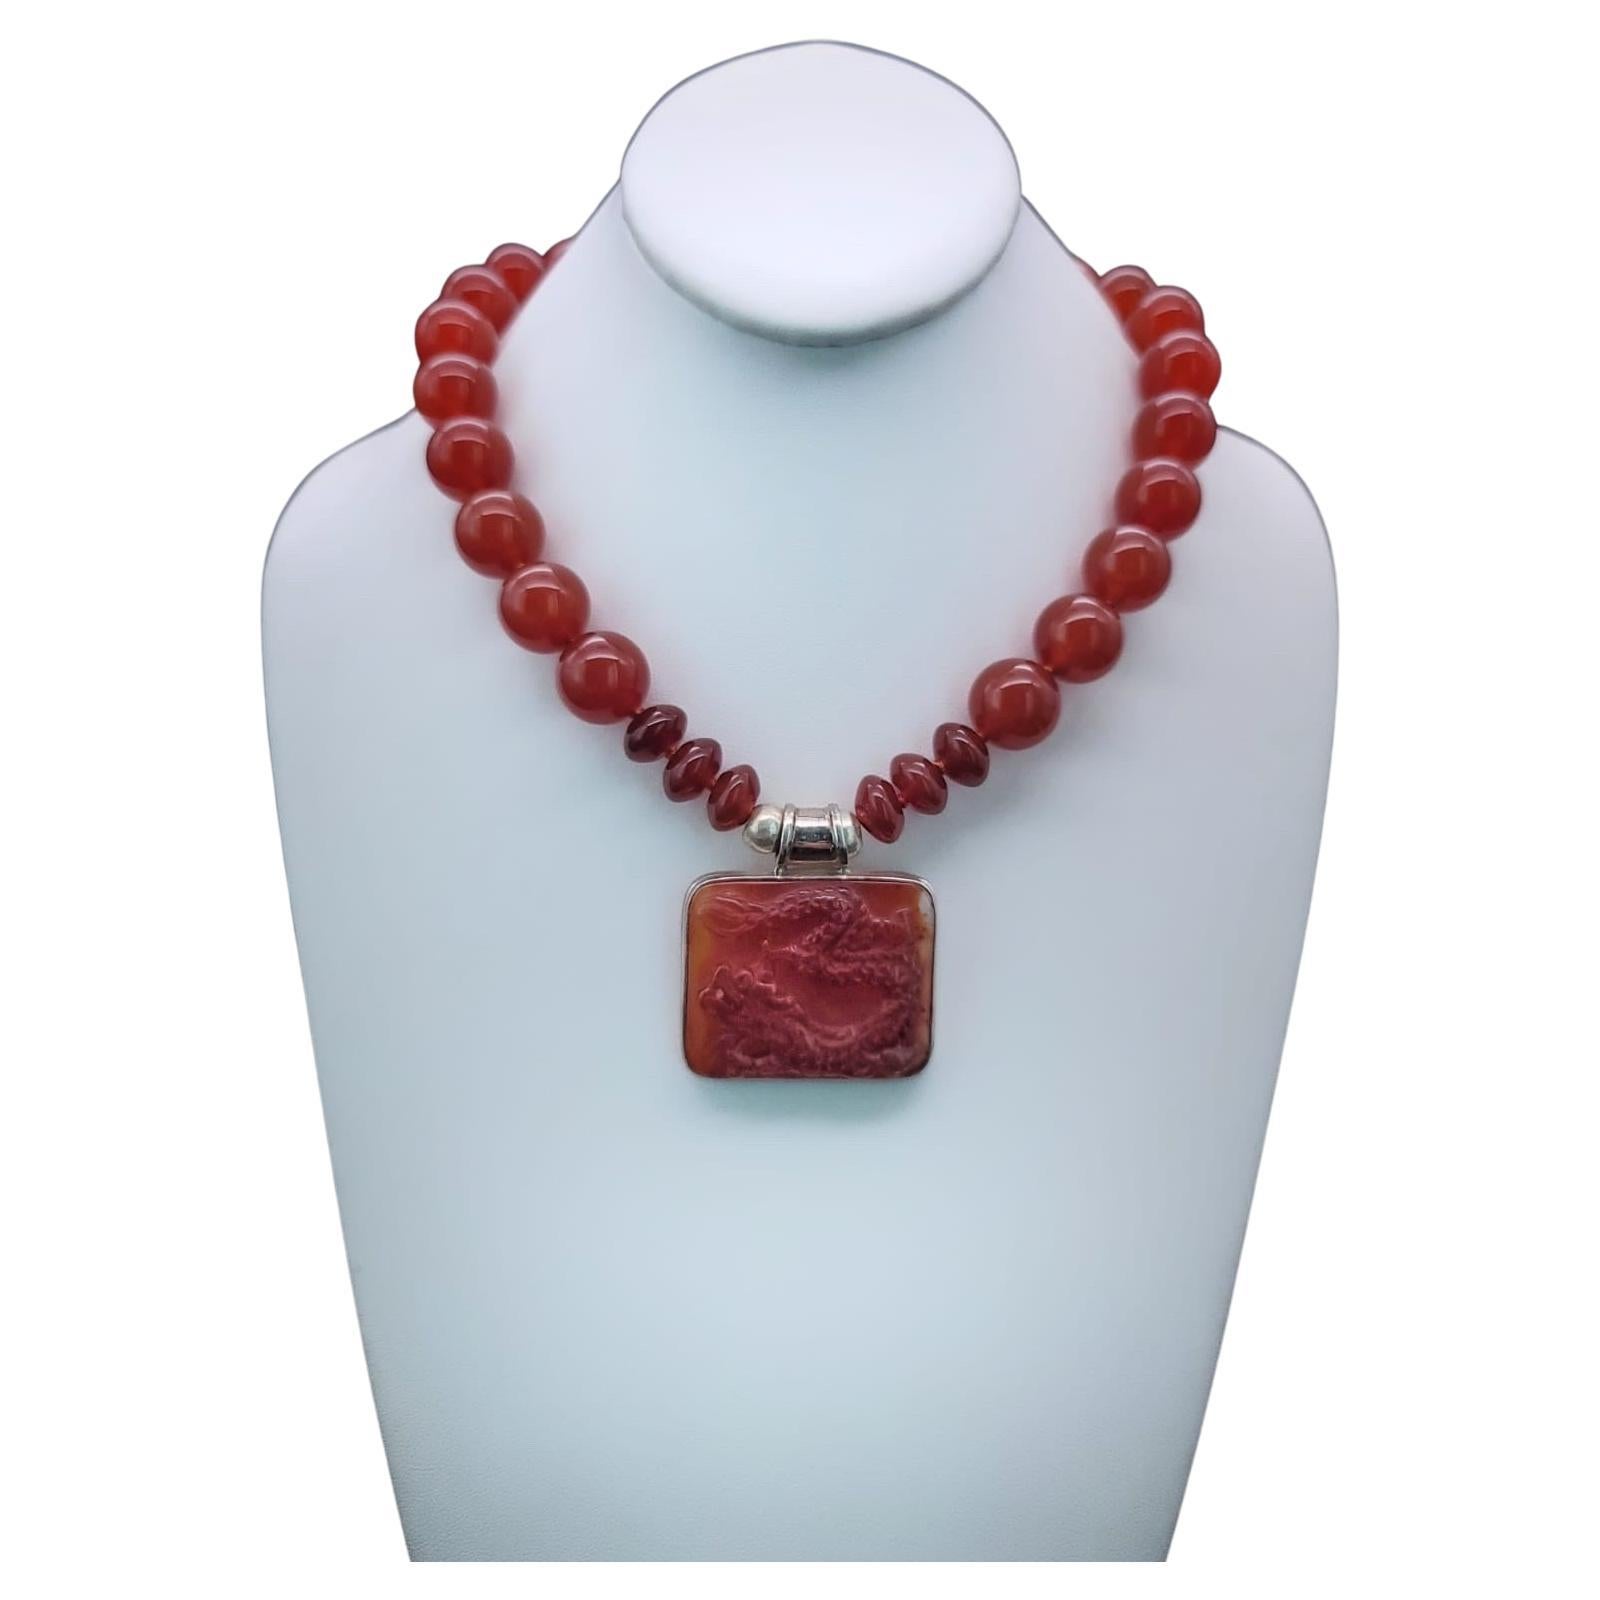 A.Jeschel Powerful Carnelian necklace with a Dragon pendant. For Sale